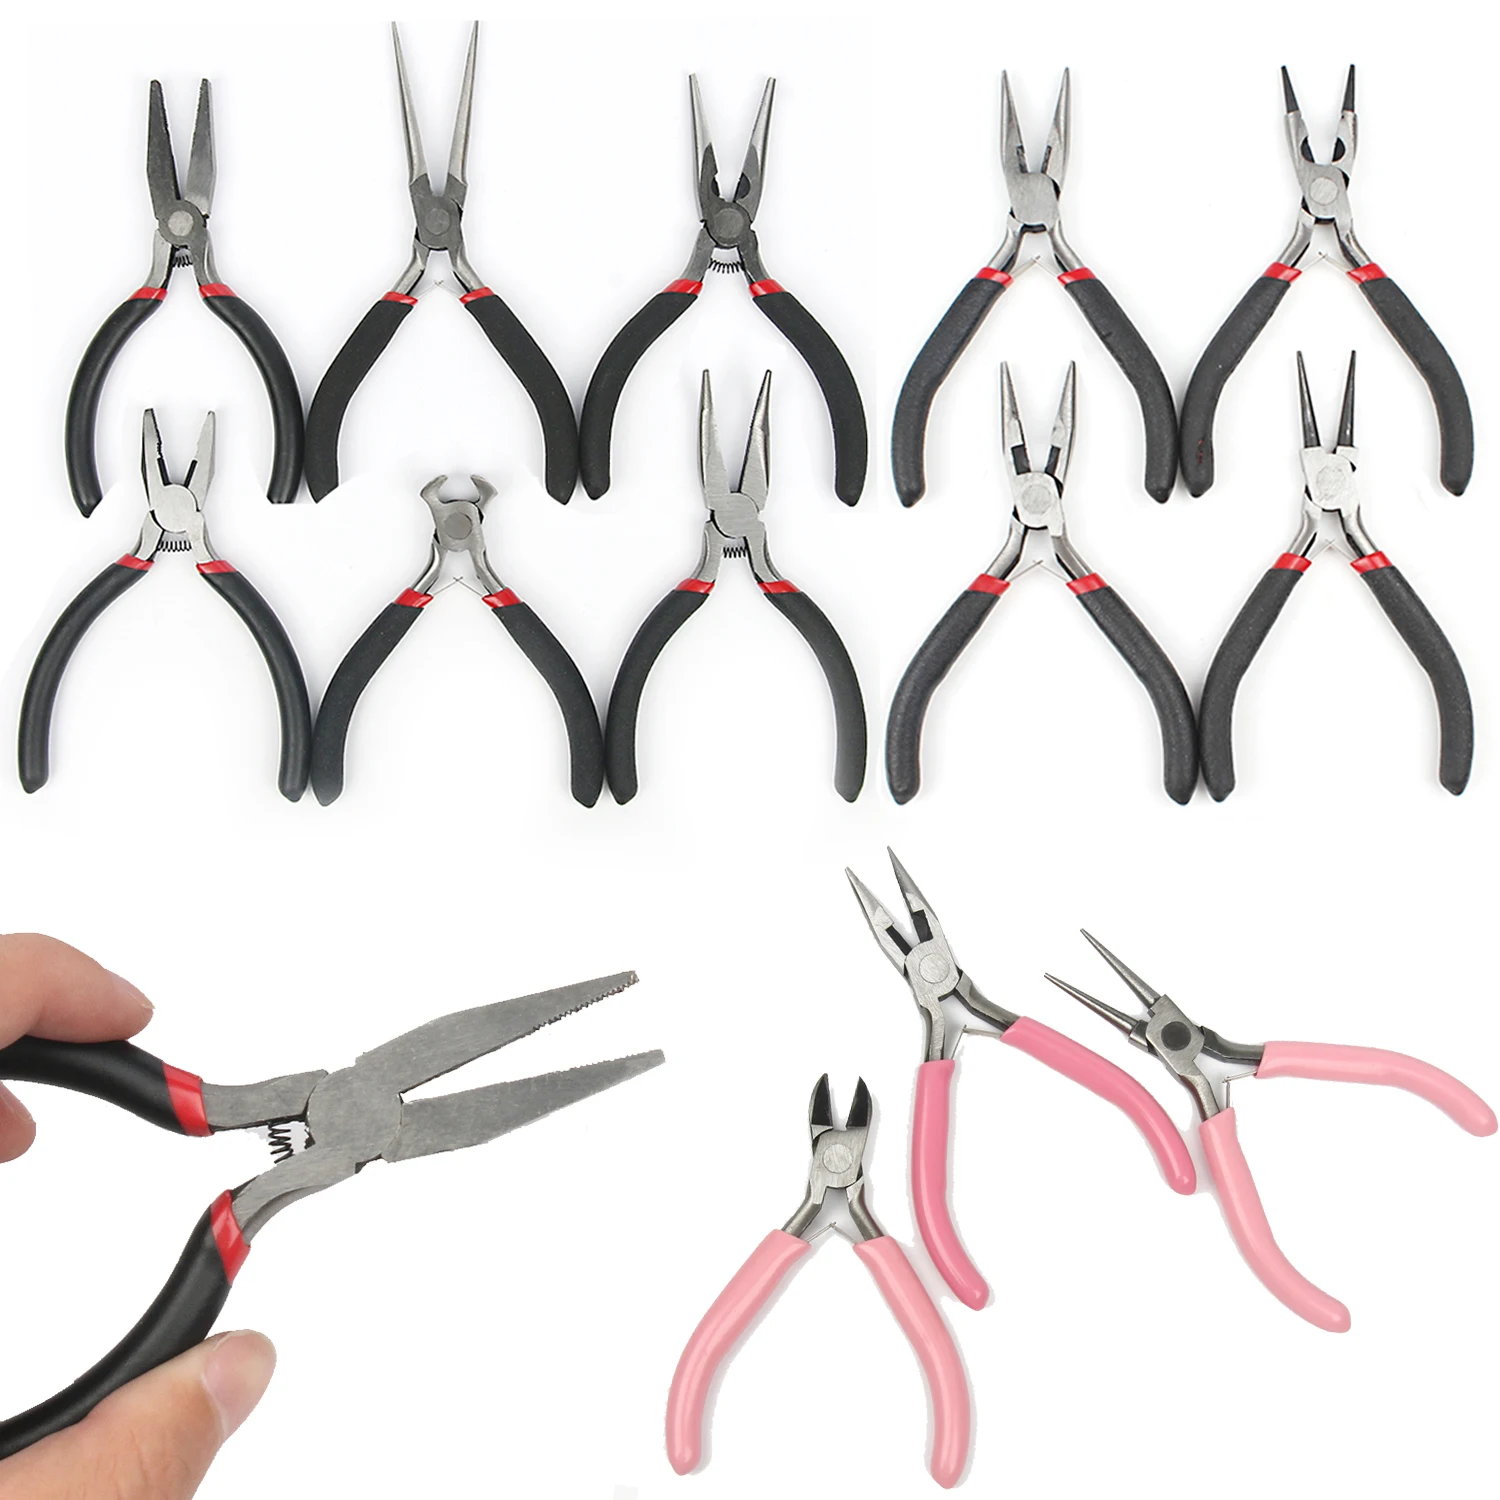 

1Pcs Mini Pliers Insulated Cutter Clamping Stripping Wire Crimping Cable Cutters Round Long Nose Pliers For Jewelry Making Tools